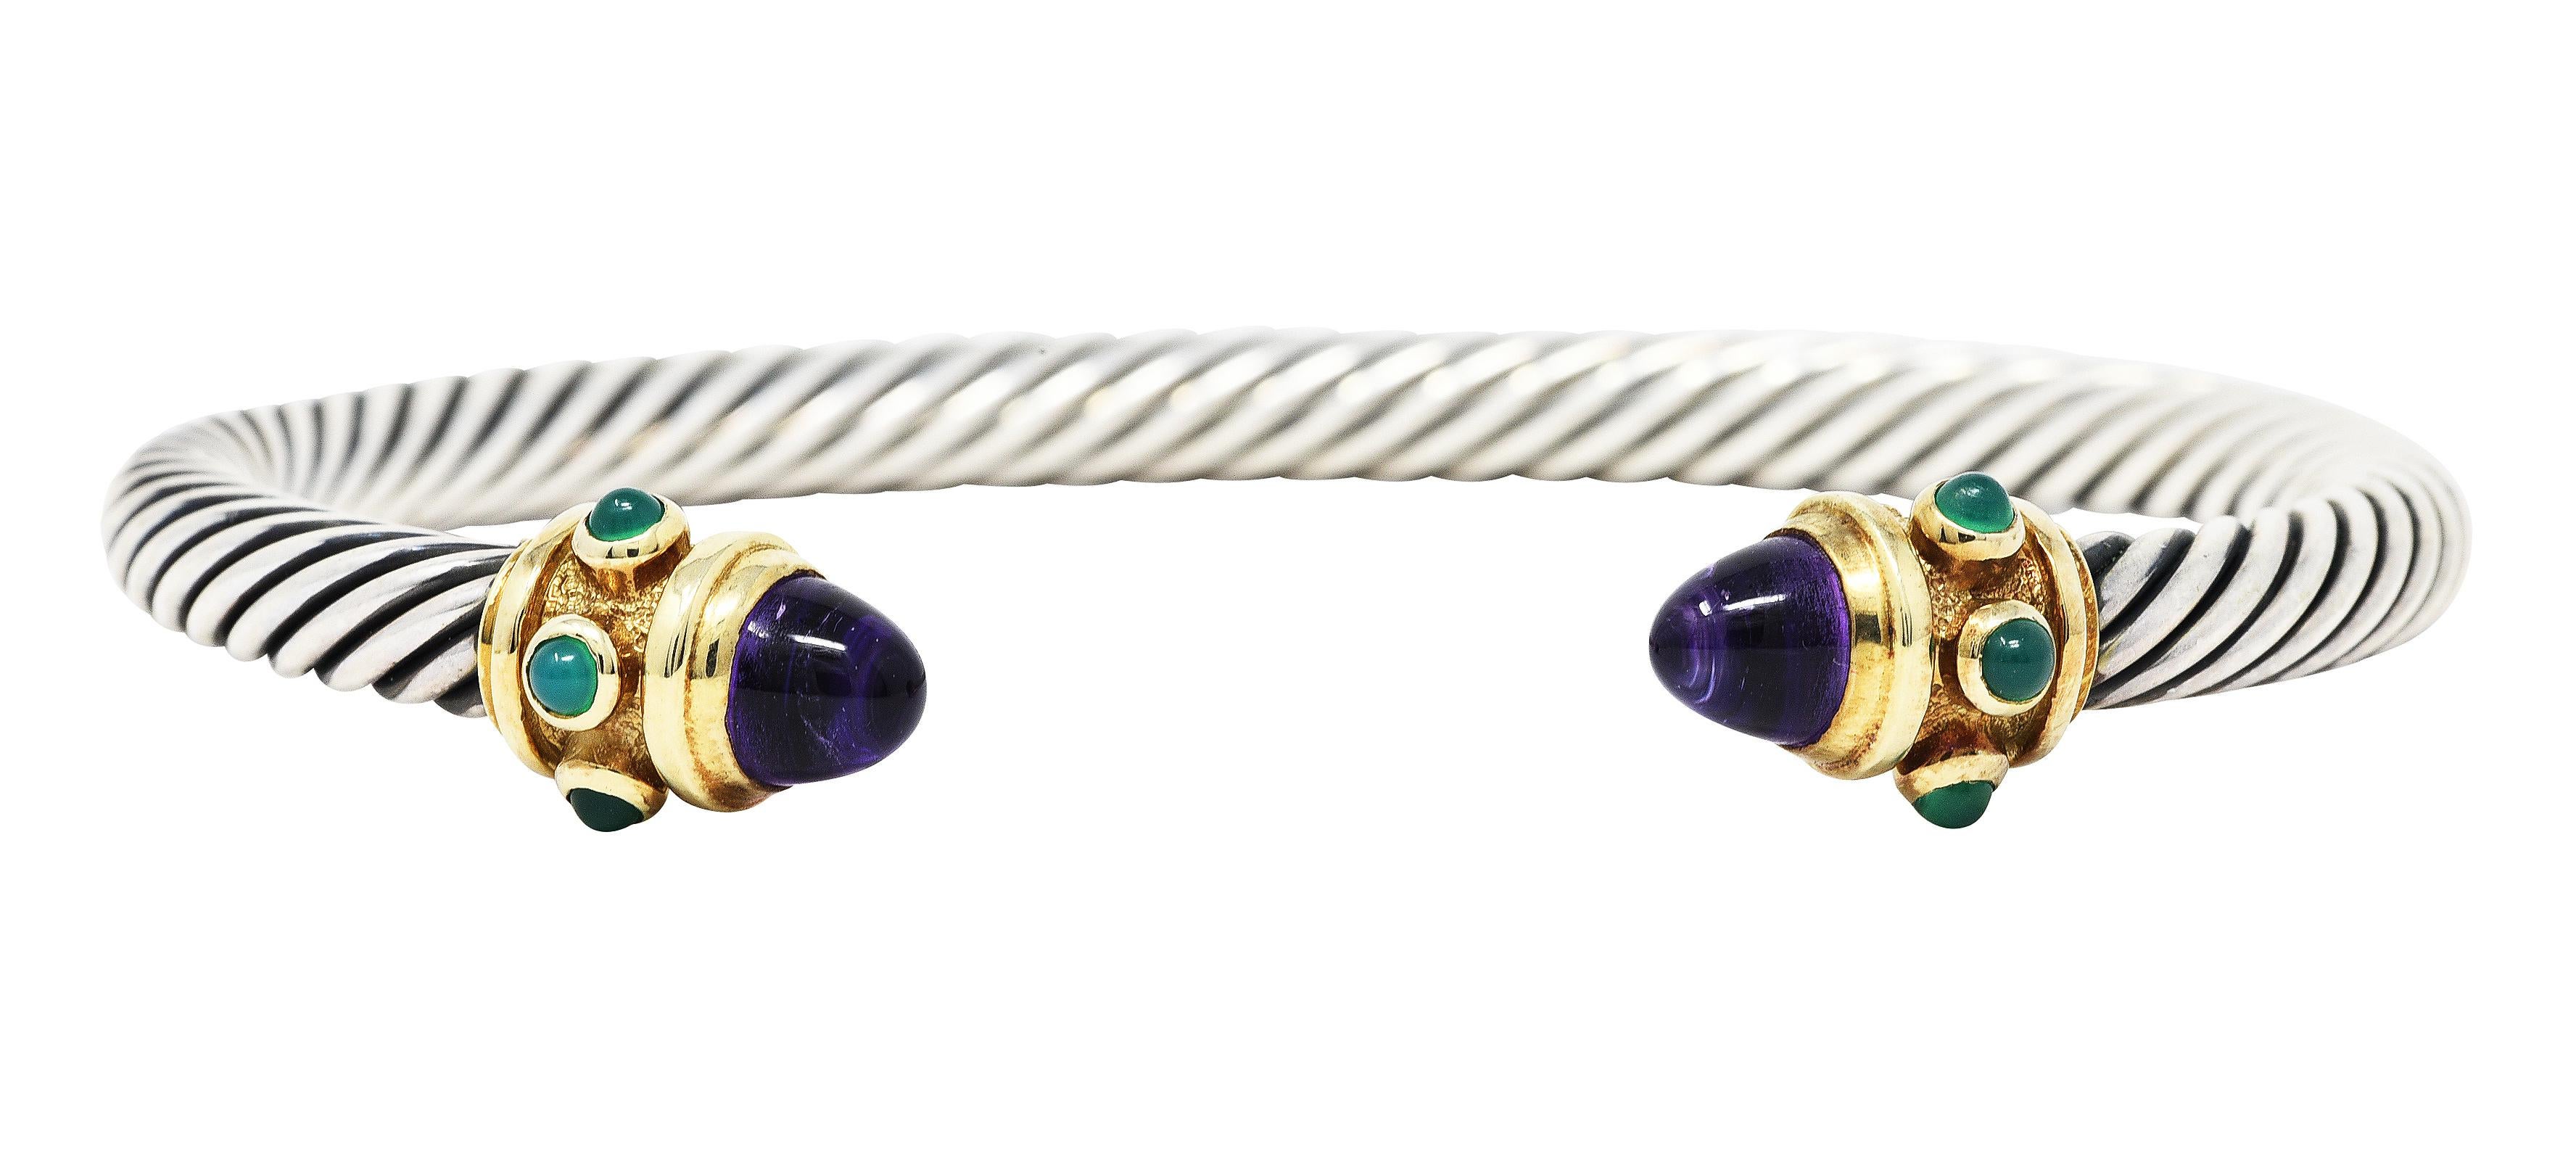 Designed as an open cuff bracelet comprised of twisting sterling silver cable 

Deeply ridged gold terminals completed by 6.0 mm amethyst bullet cabochons - transparent purple in color

Accented by bluish green bezel set 3.0 mm chrysoprase